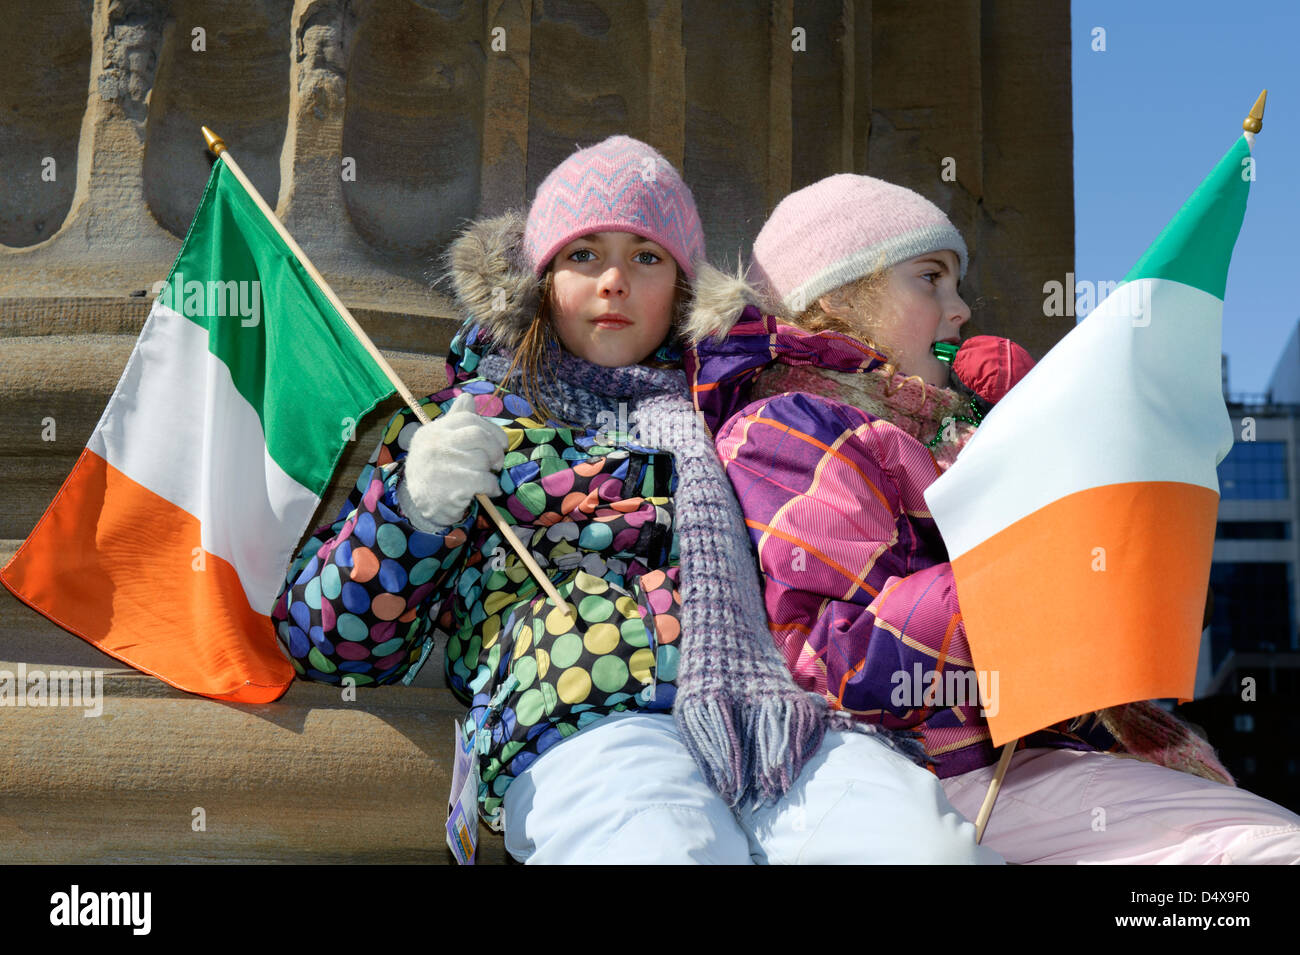 Two young girls with Irish flags attending the St Patrick's day parade in Montreal, province of Quebec, Canada. Stock Photo